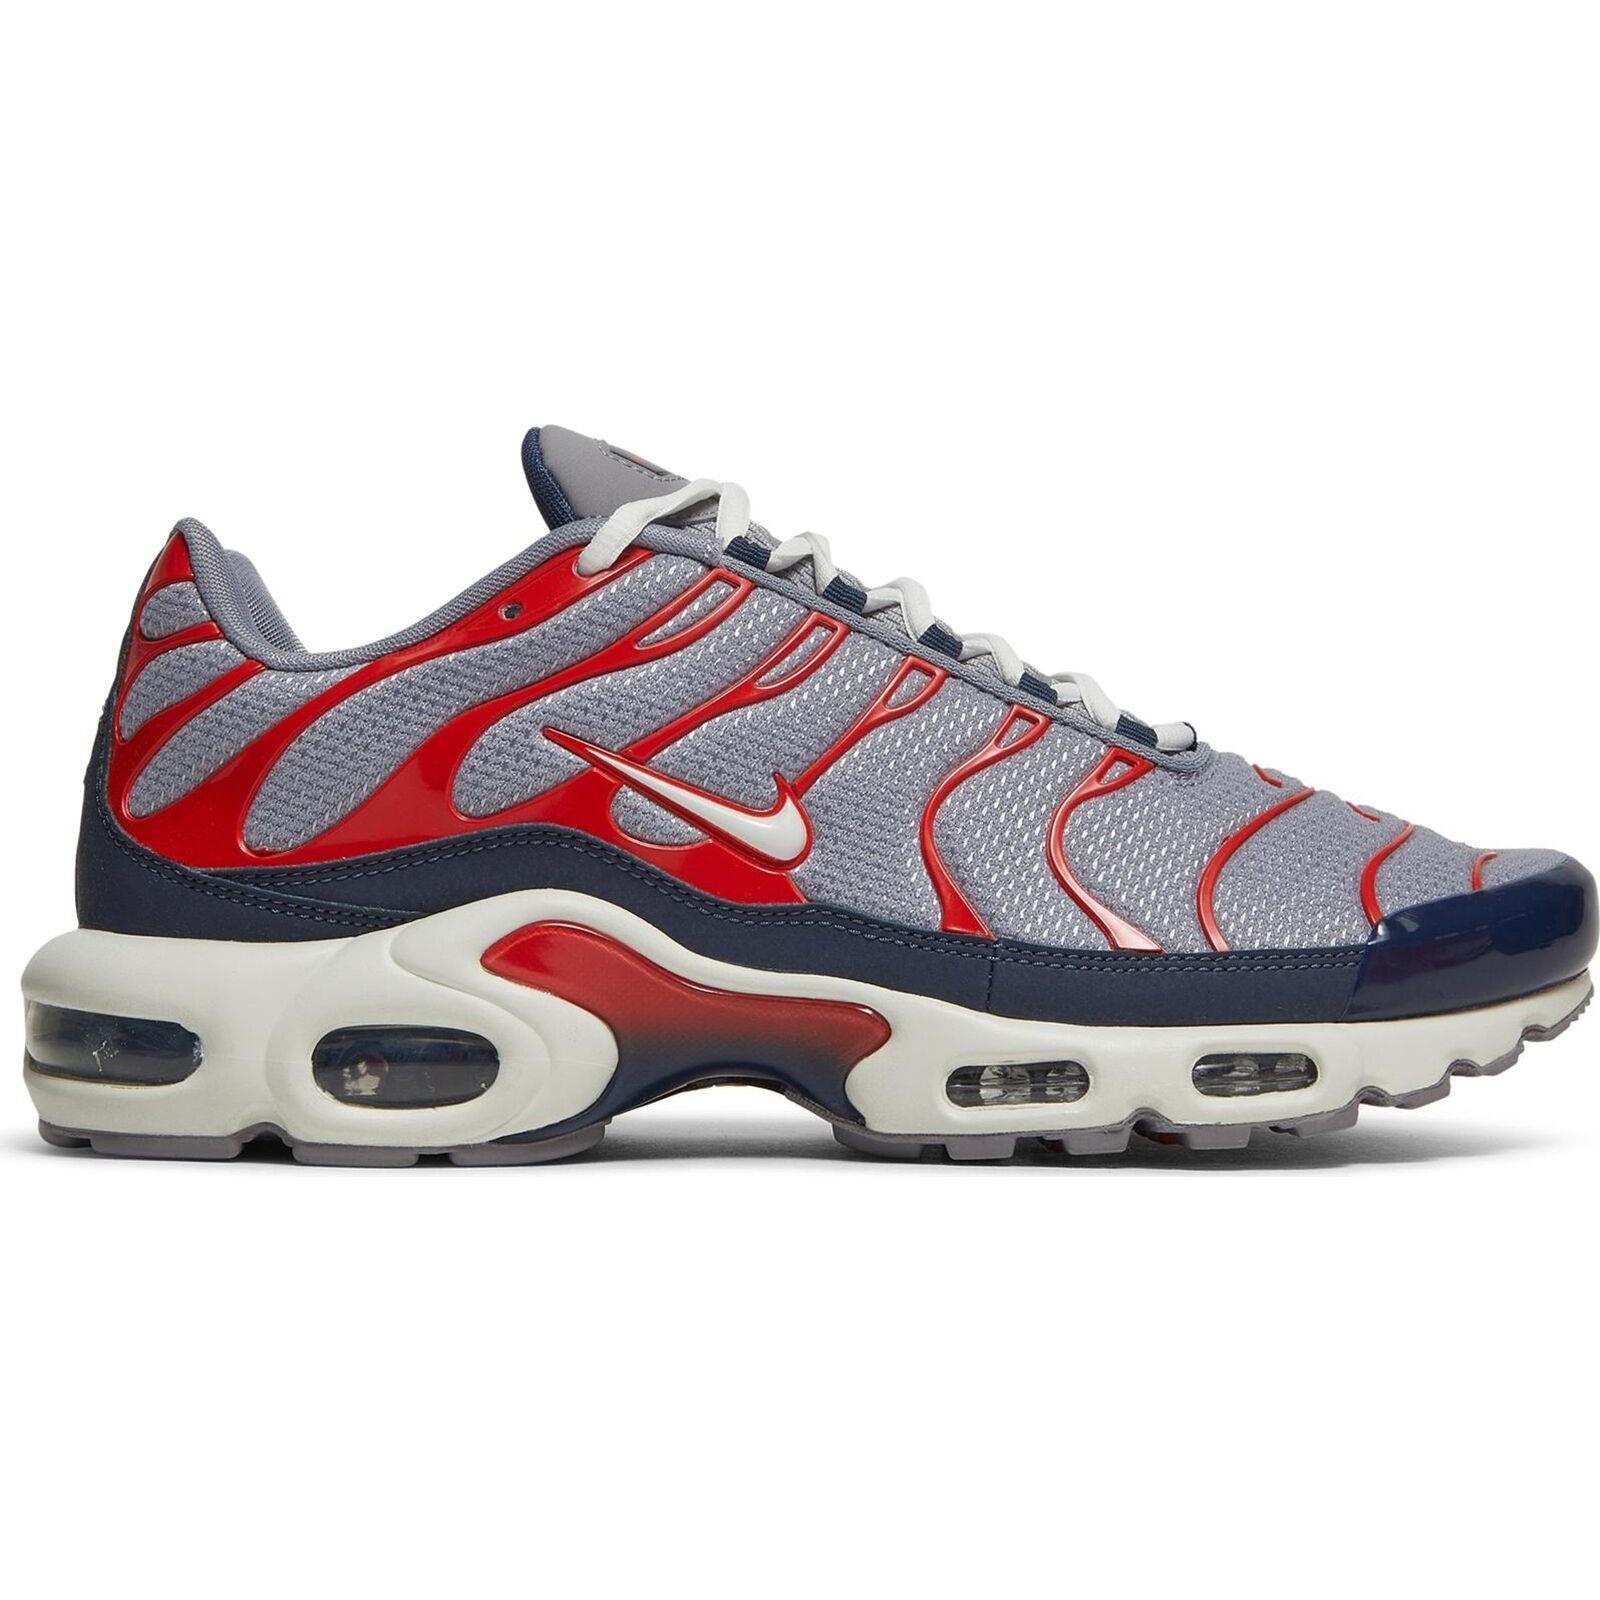 Nike Air Max Plus Cement Grey Usa Summit White Red Navy DB0682-003